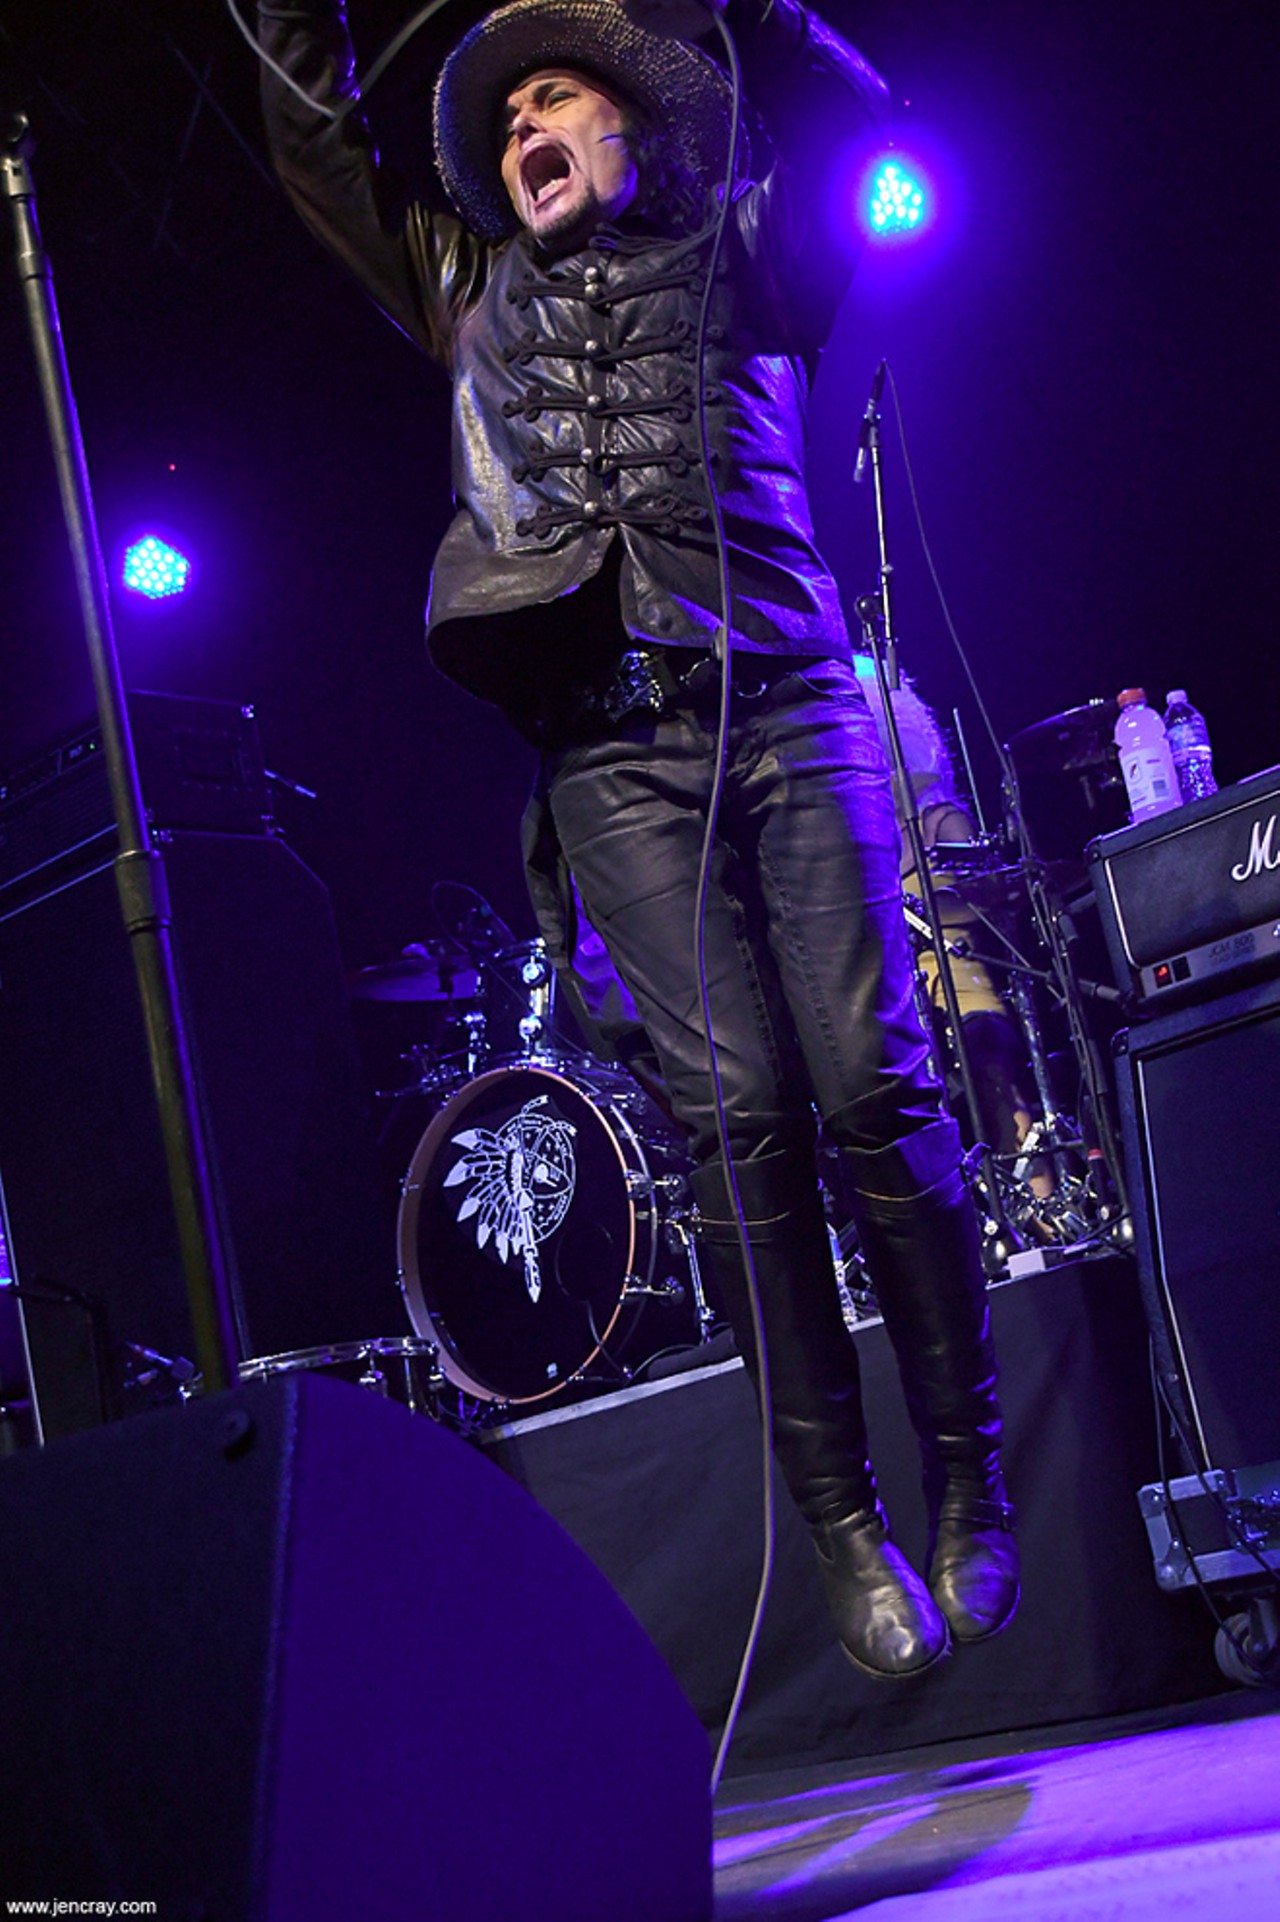 Photos from Adam Ant and Glam Skanks at the Beacham